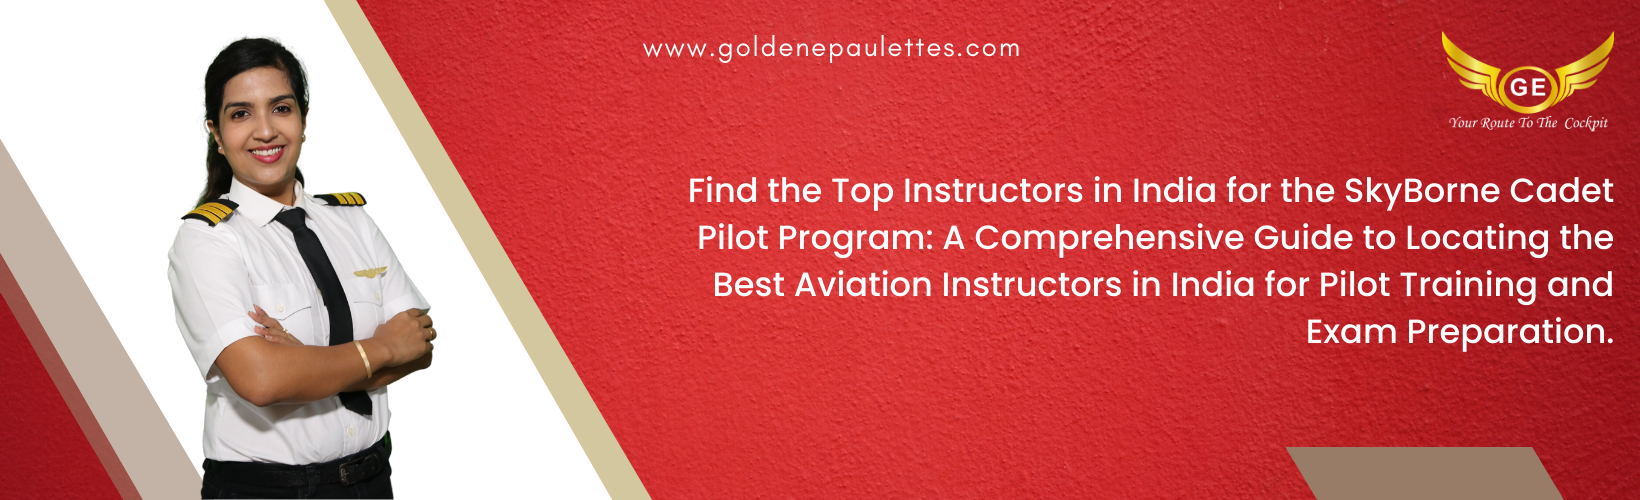 Finding the Best Instructors in India for the SkyBorne Cadet Pilot Program